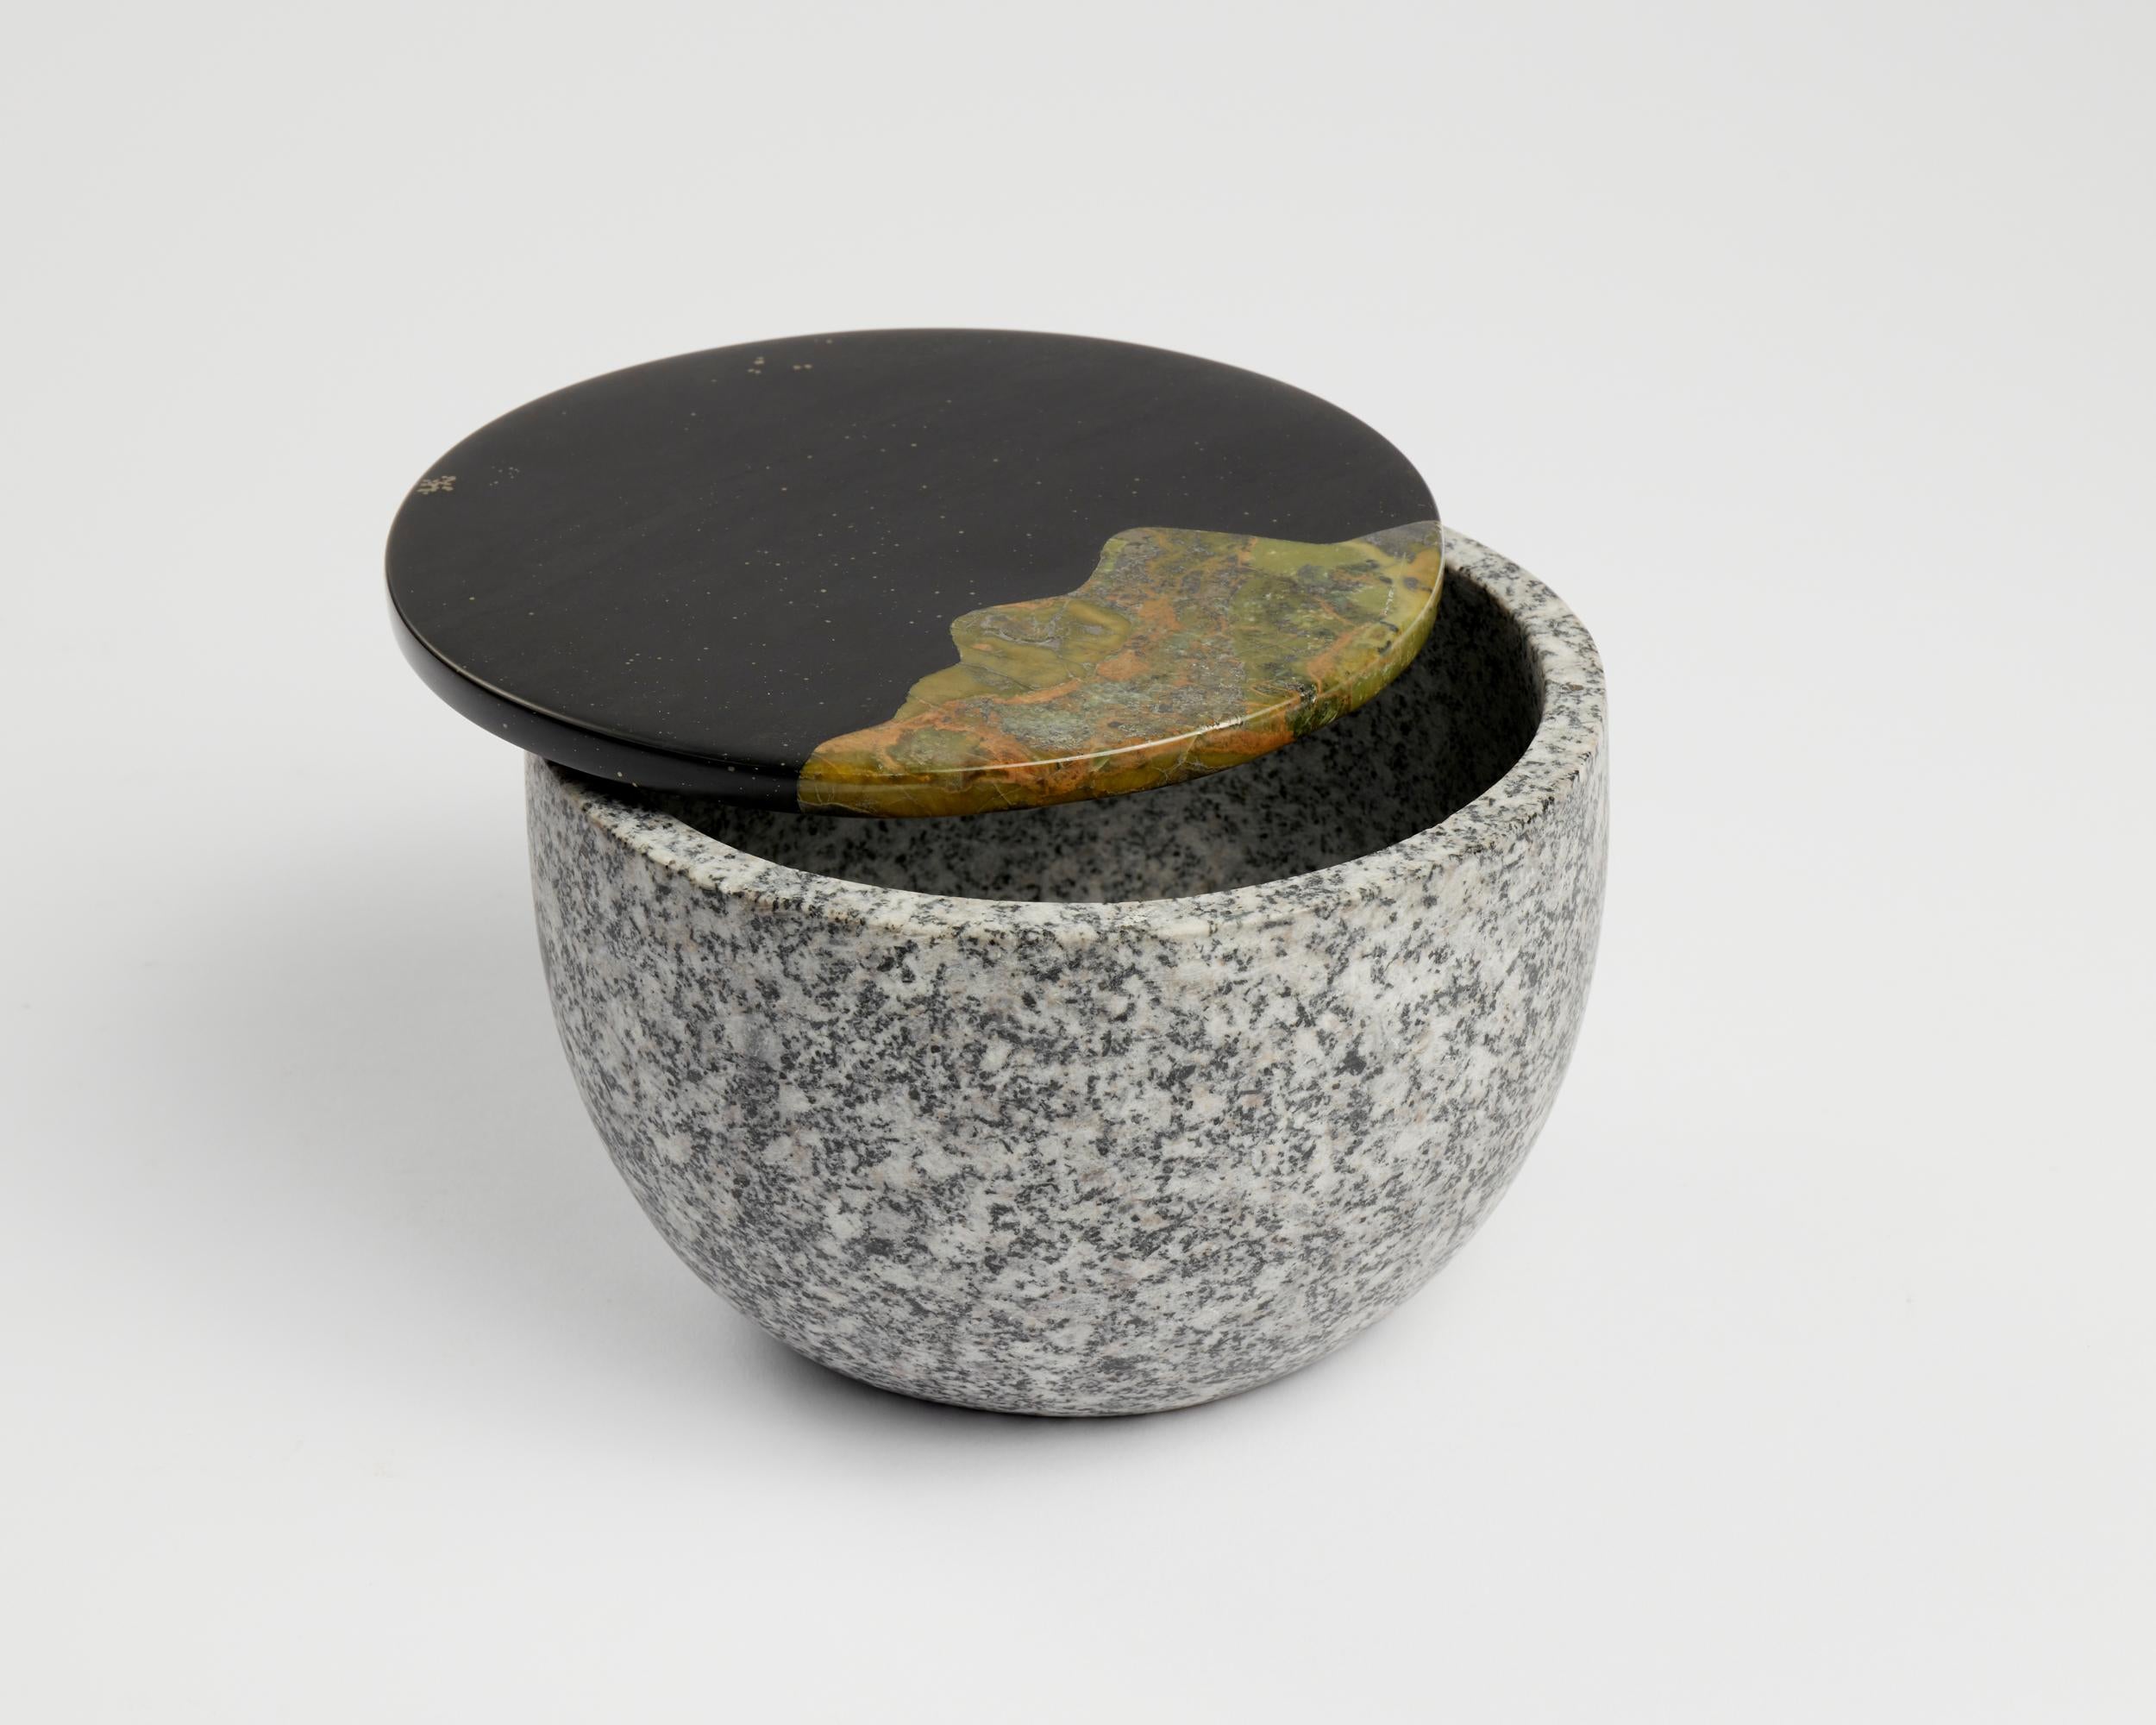 Sprouter Pot by Estudio Rafael Freyre
Dimensions: D 15 x H 8 cm 
Materials: Andes Stone, Amazonic Wood.
Also Available: Other materials and finishes available.

The Sprouters series explores the interaction of mineral and plant organisms. When